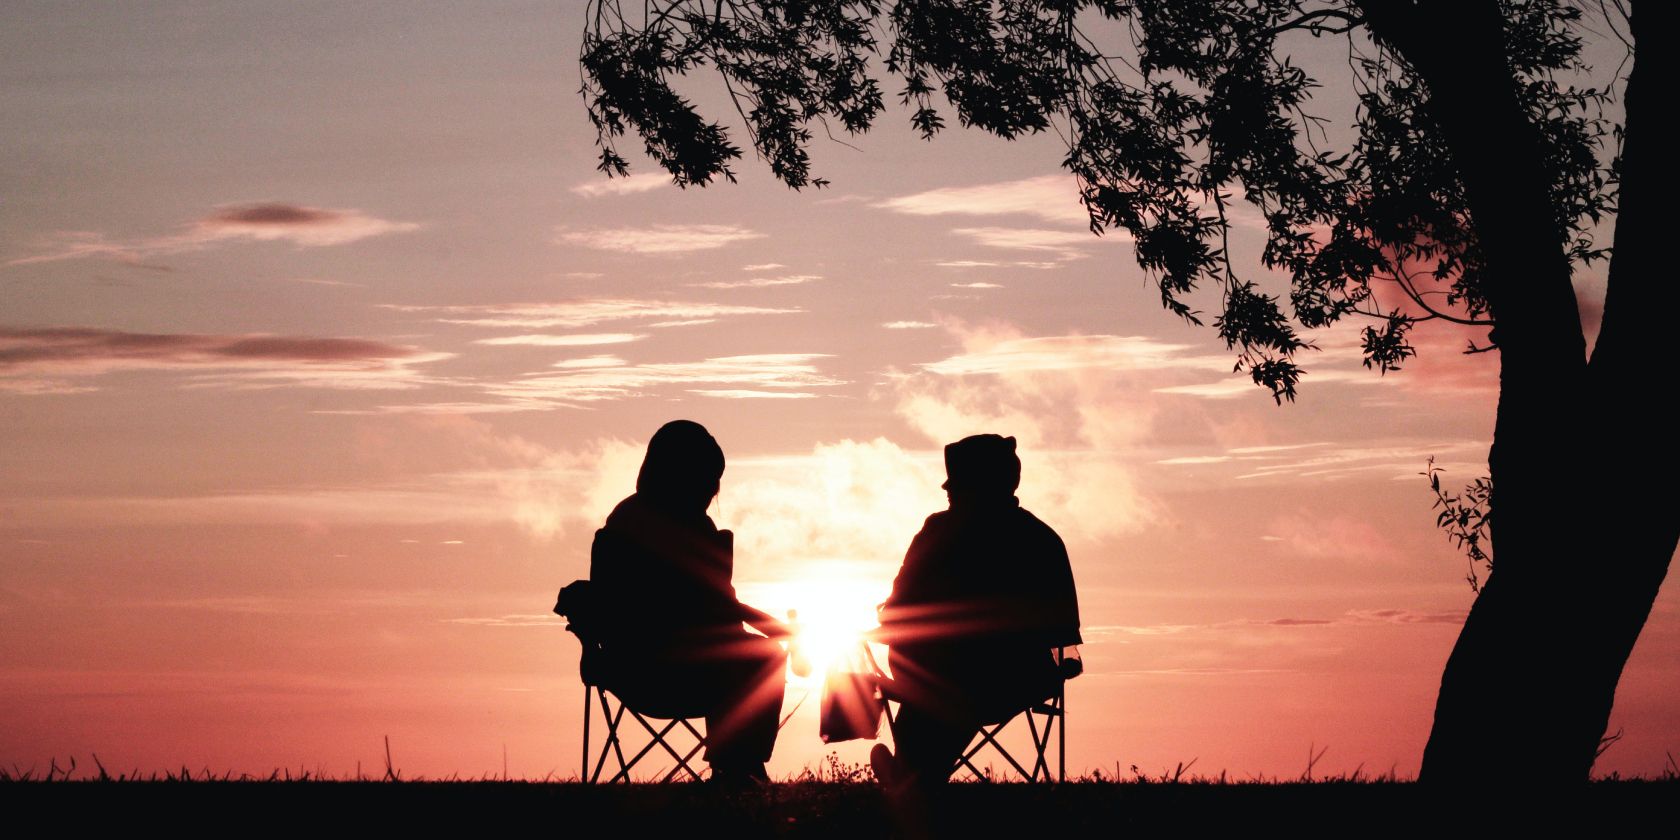 A couple sitting on chairs in front of sunset